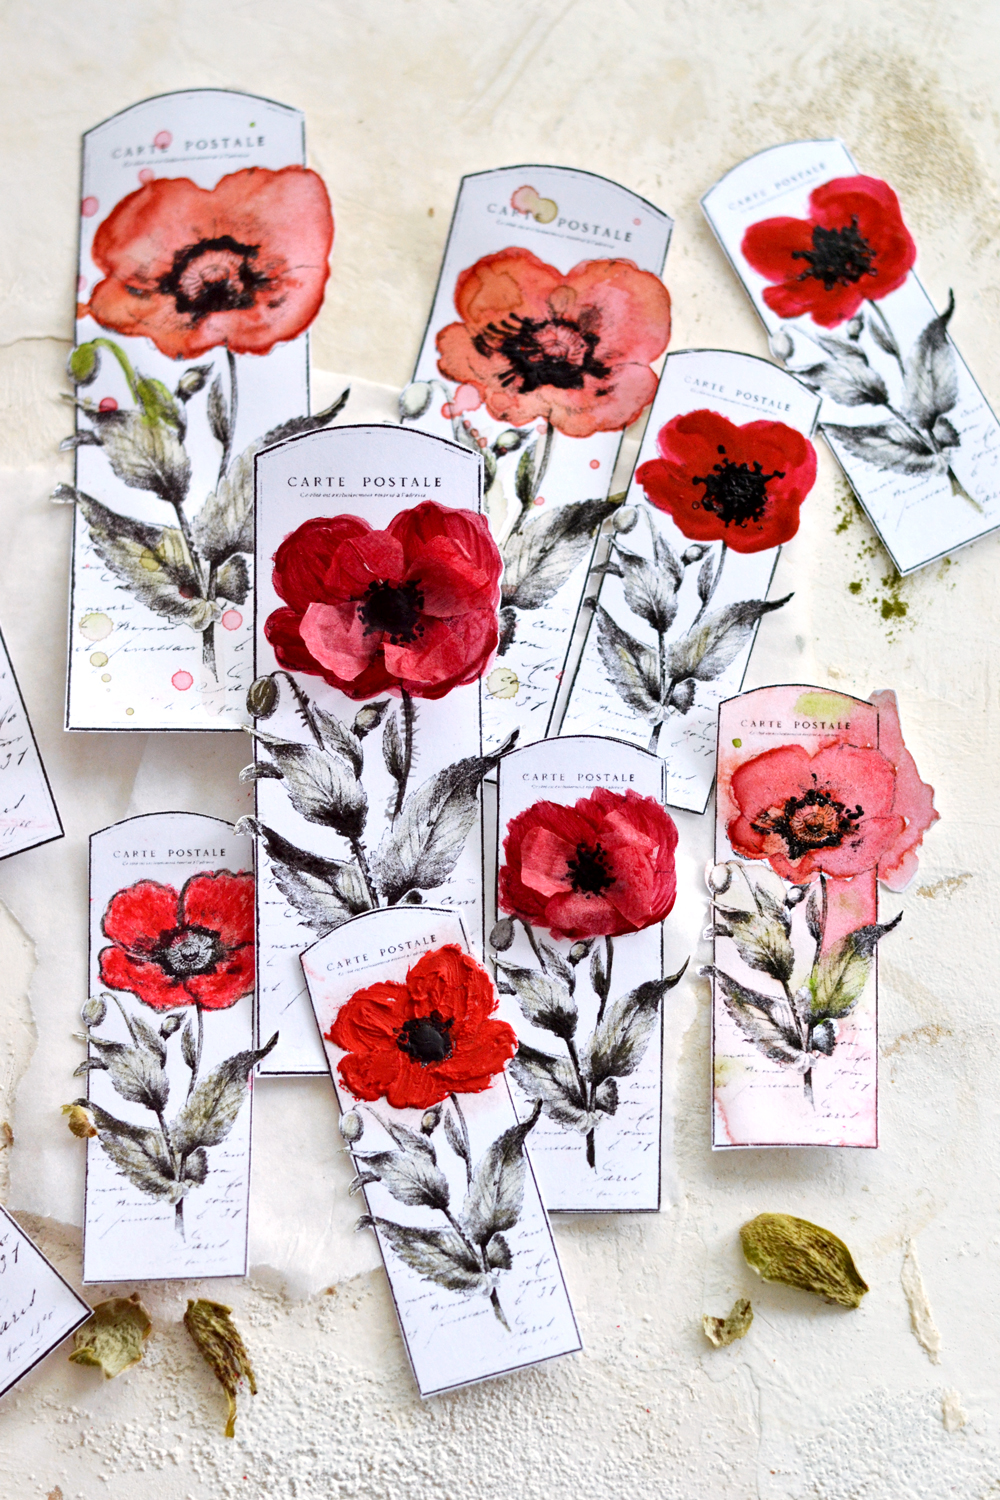 Finished Red Poppy Crafts